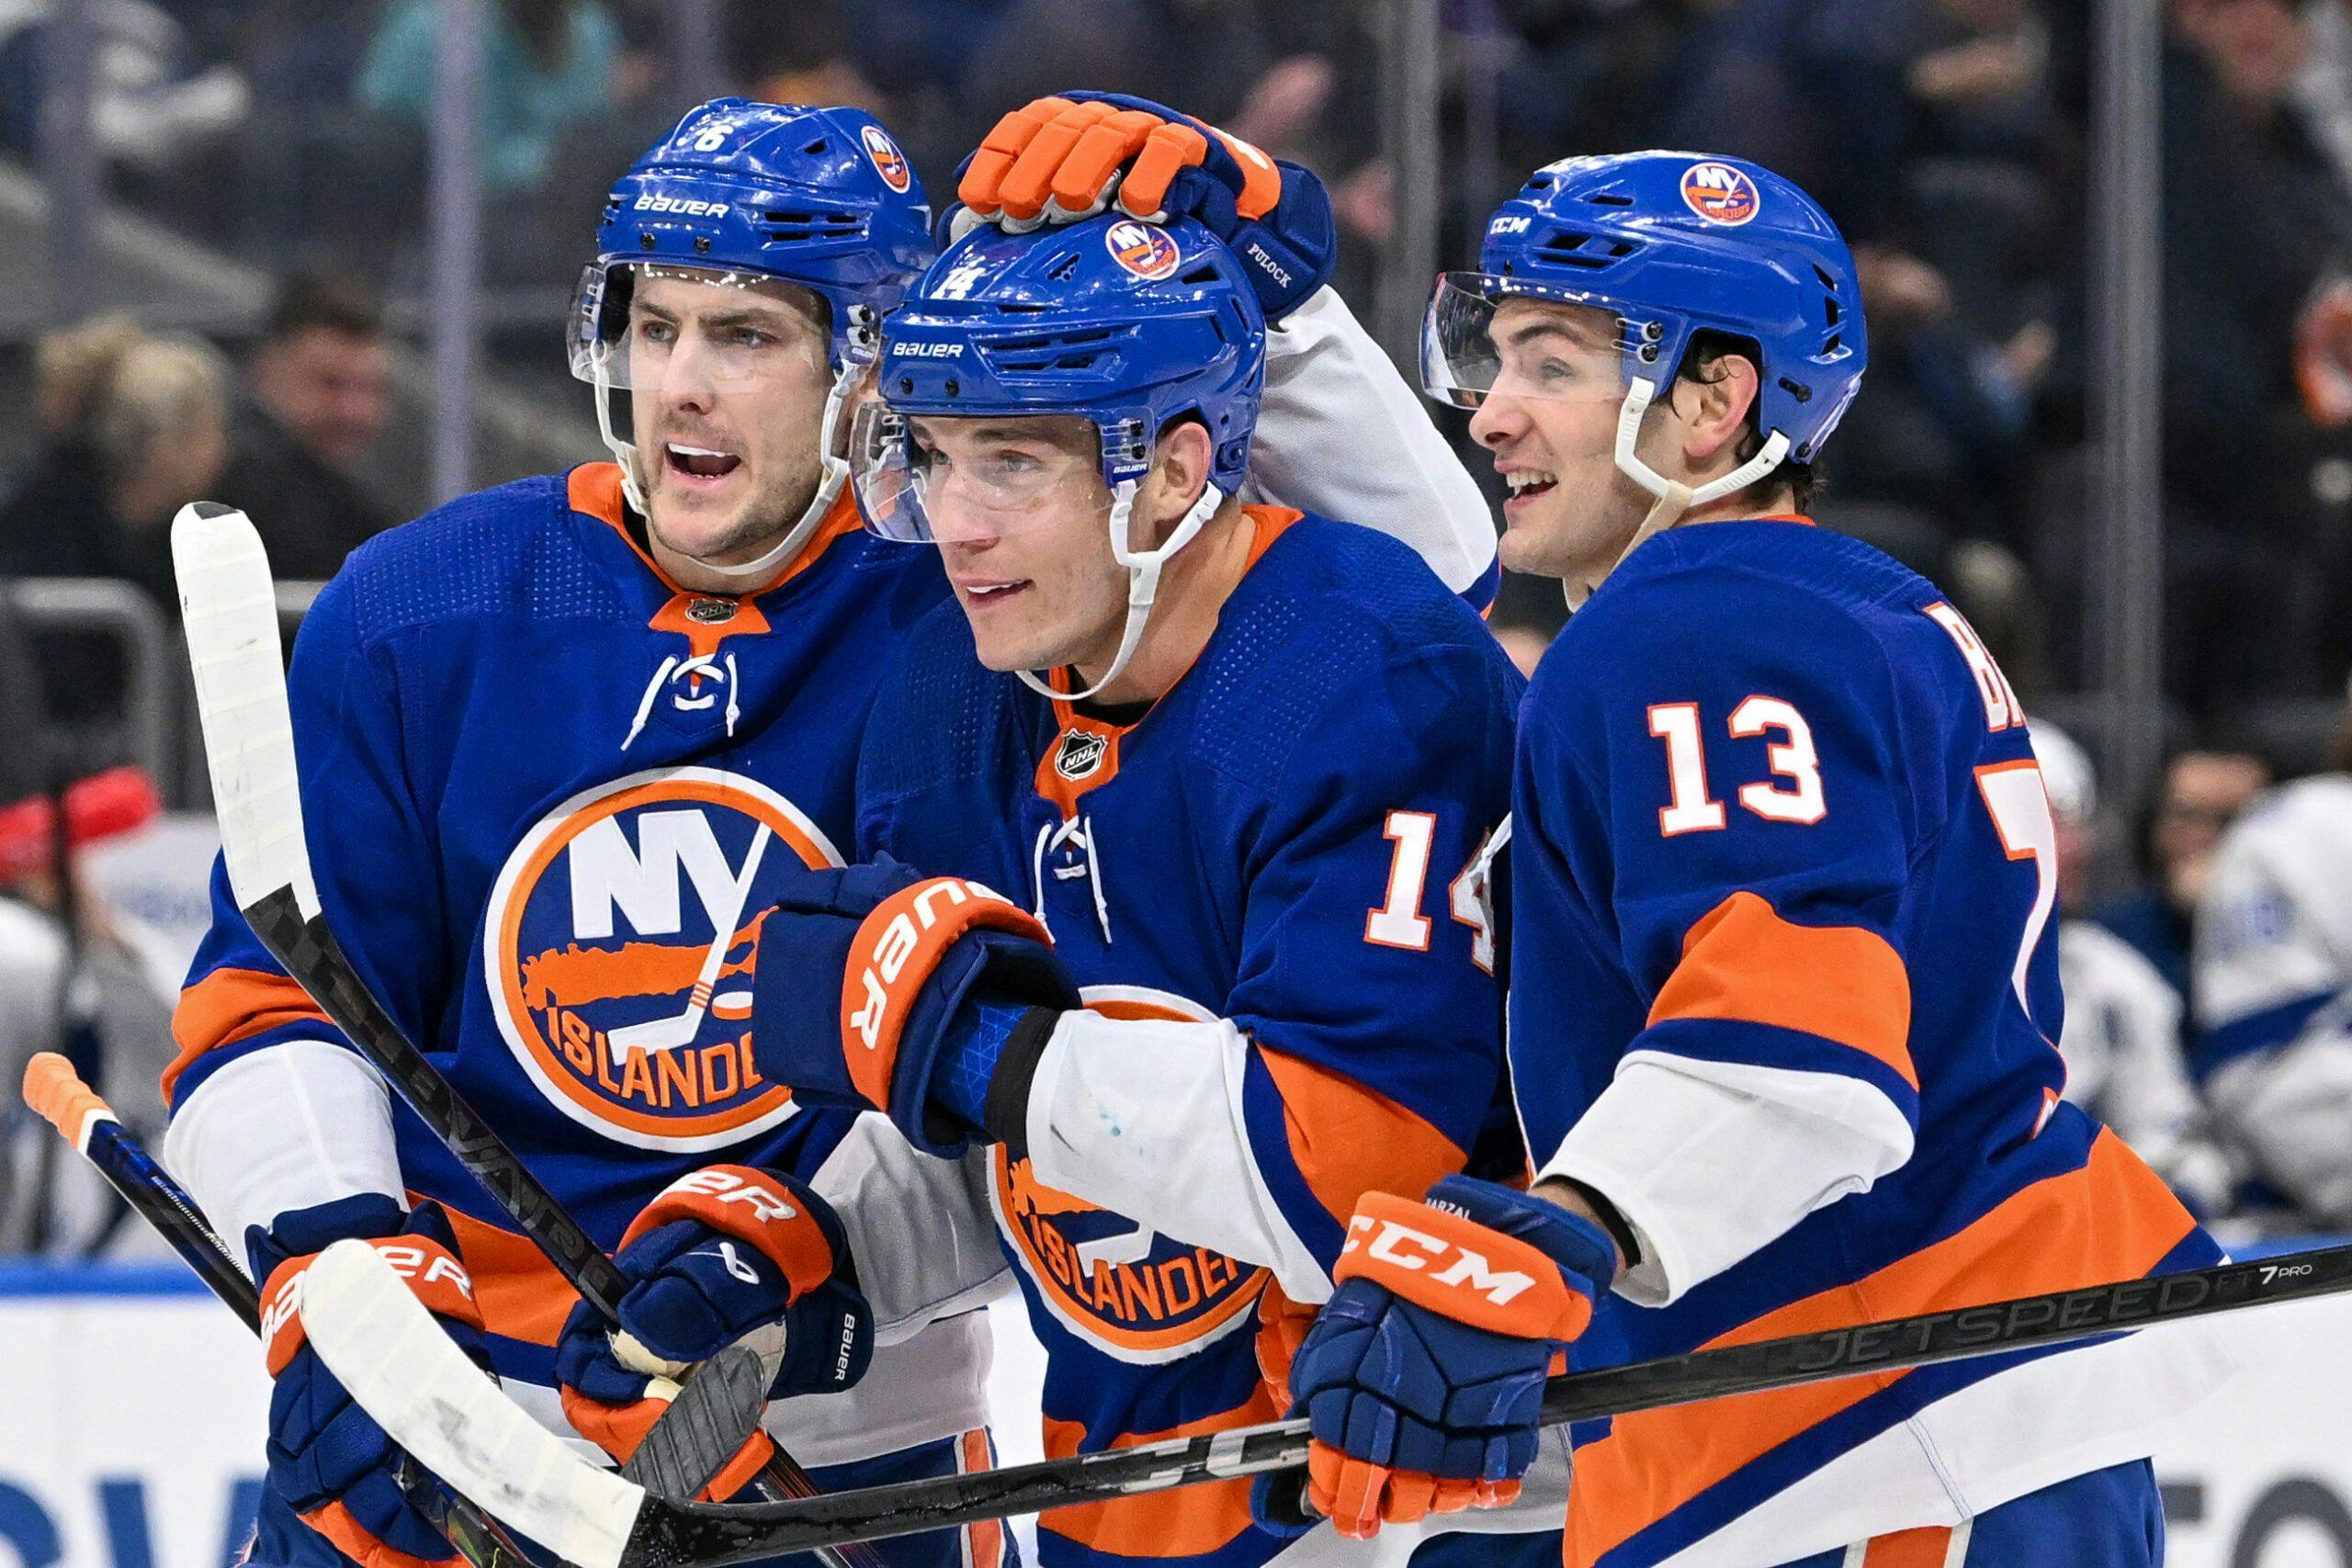 New York Islanders are in the playoff driver’s seat